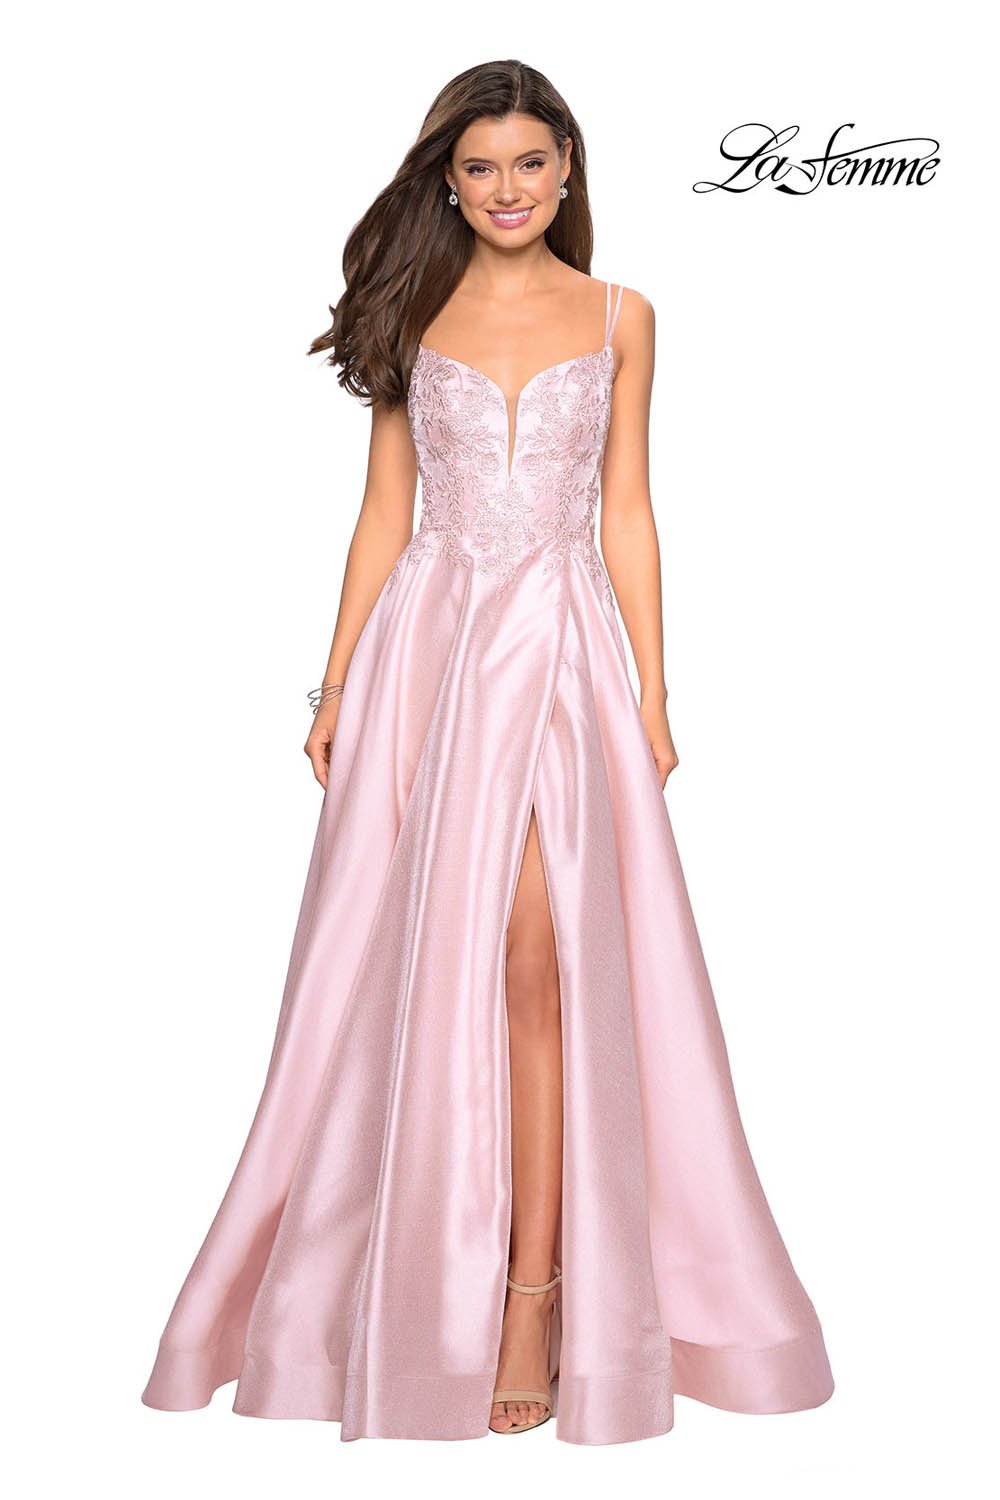 La Femme 27528 dress images in these colors: Blush, Lavender, Red, Sapphire Blue.